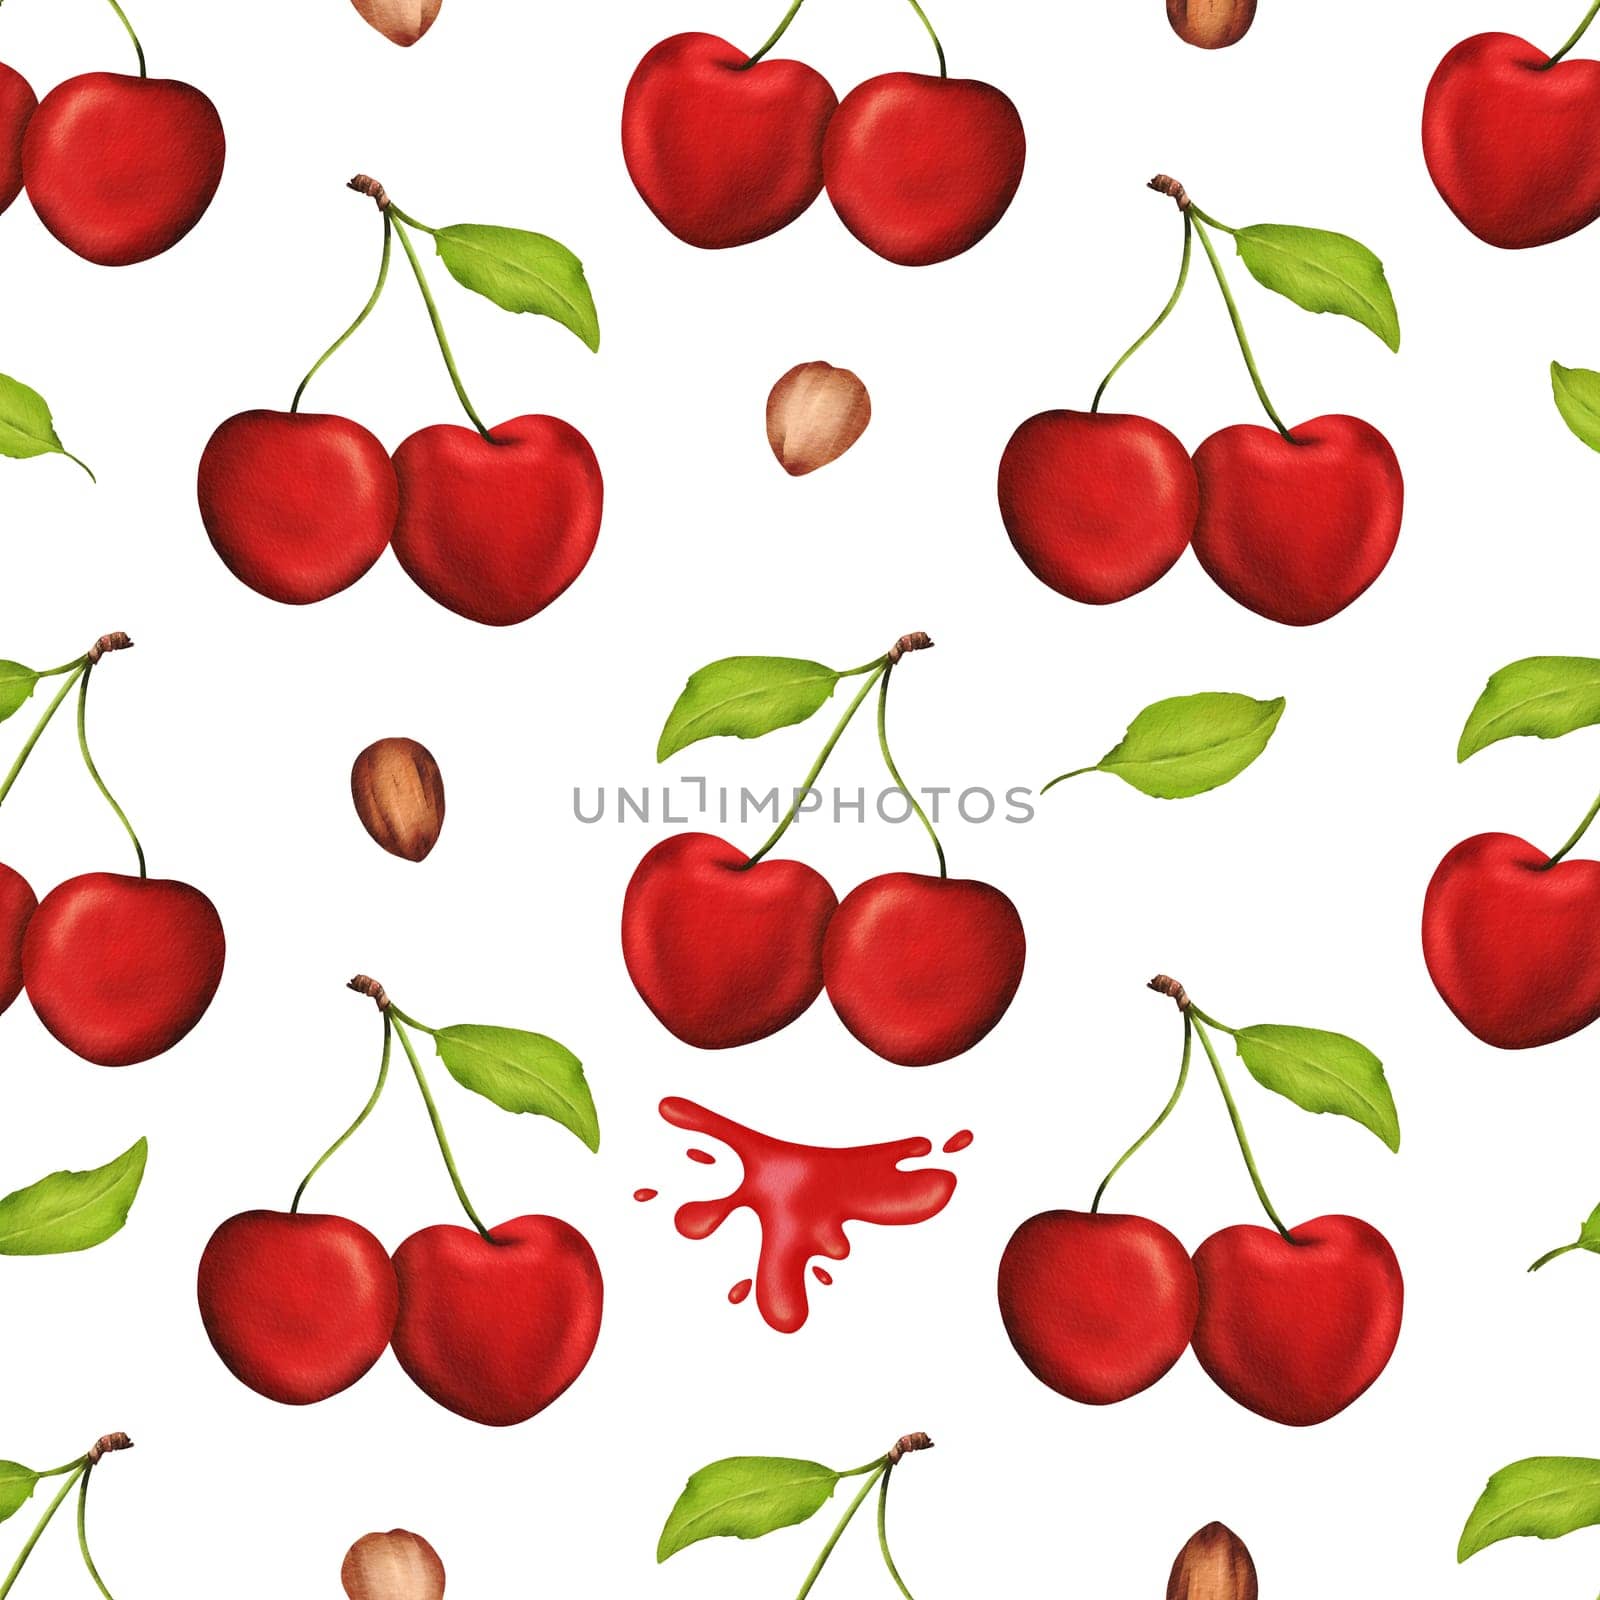 Vibrant, juicy cherries adorn this seamless watercolor pattern. Ideal for kitchen decor, recipes, textiles, jam labels, aprons, packaging, juices, cherry sweets, and gum wrappers by Art_Mari_Ka